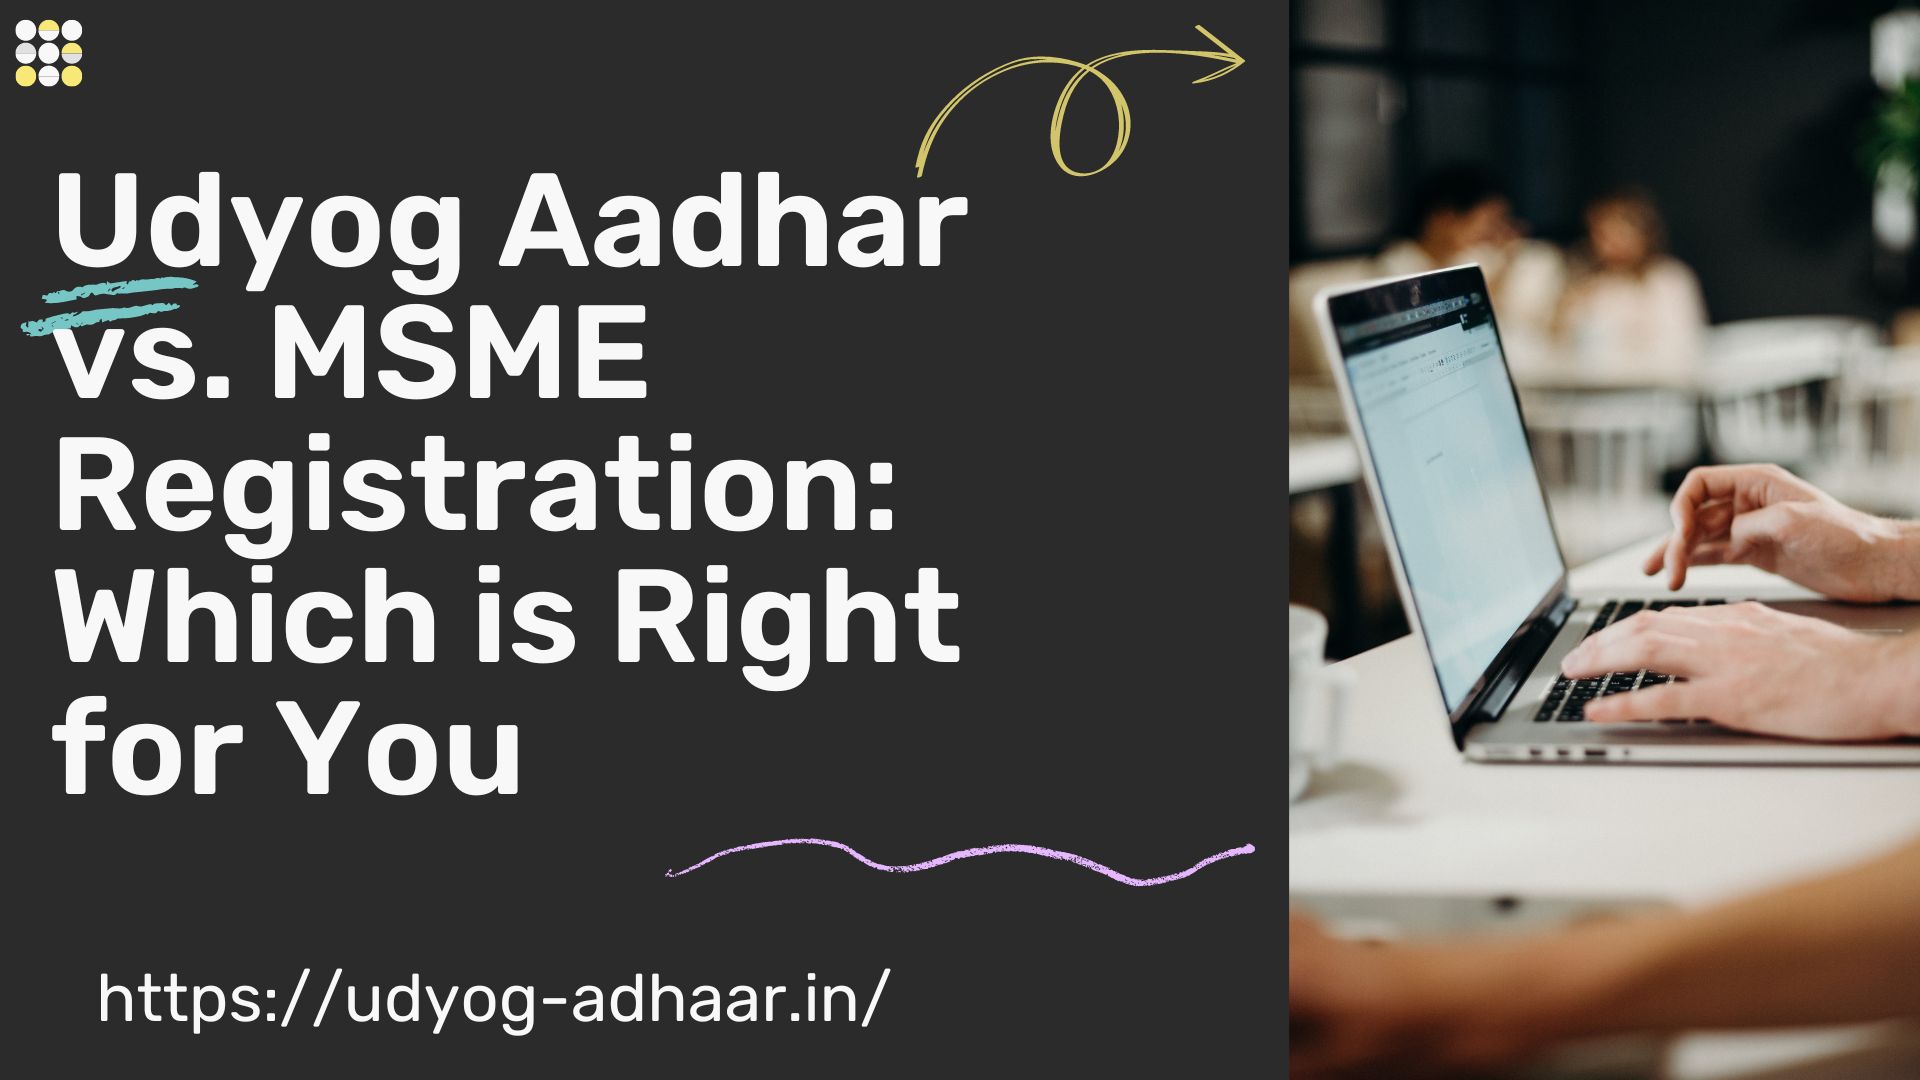 Udyog Aadhar vs. MSME Registration: Which is Right for You